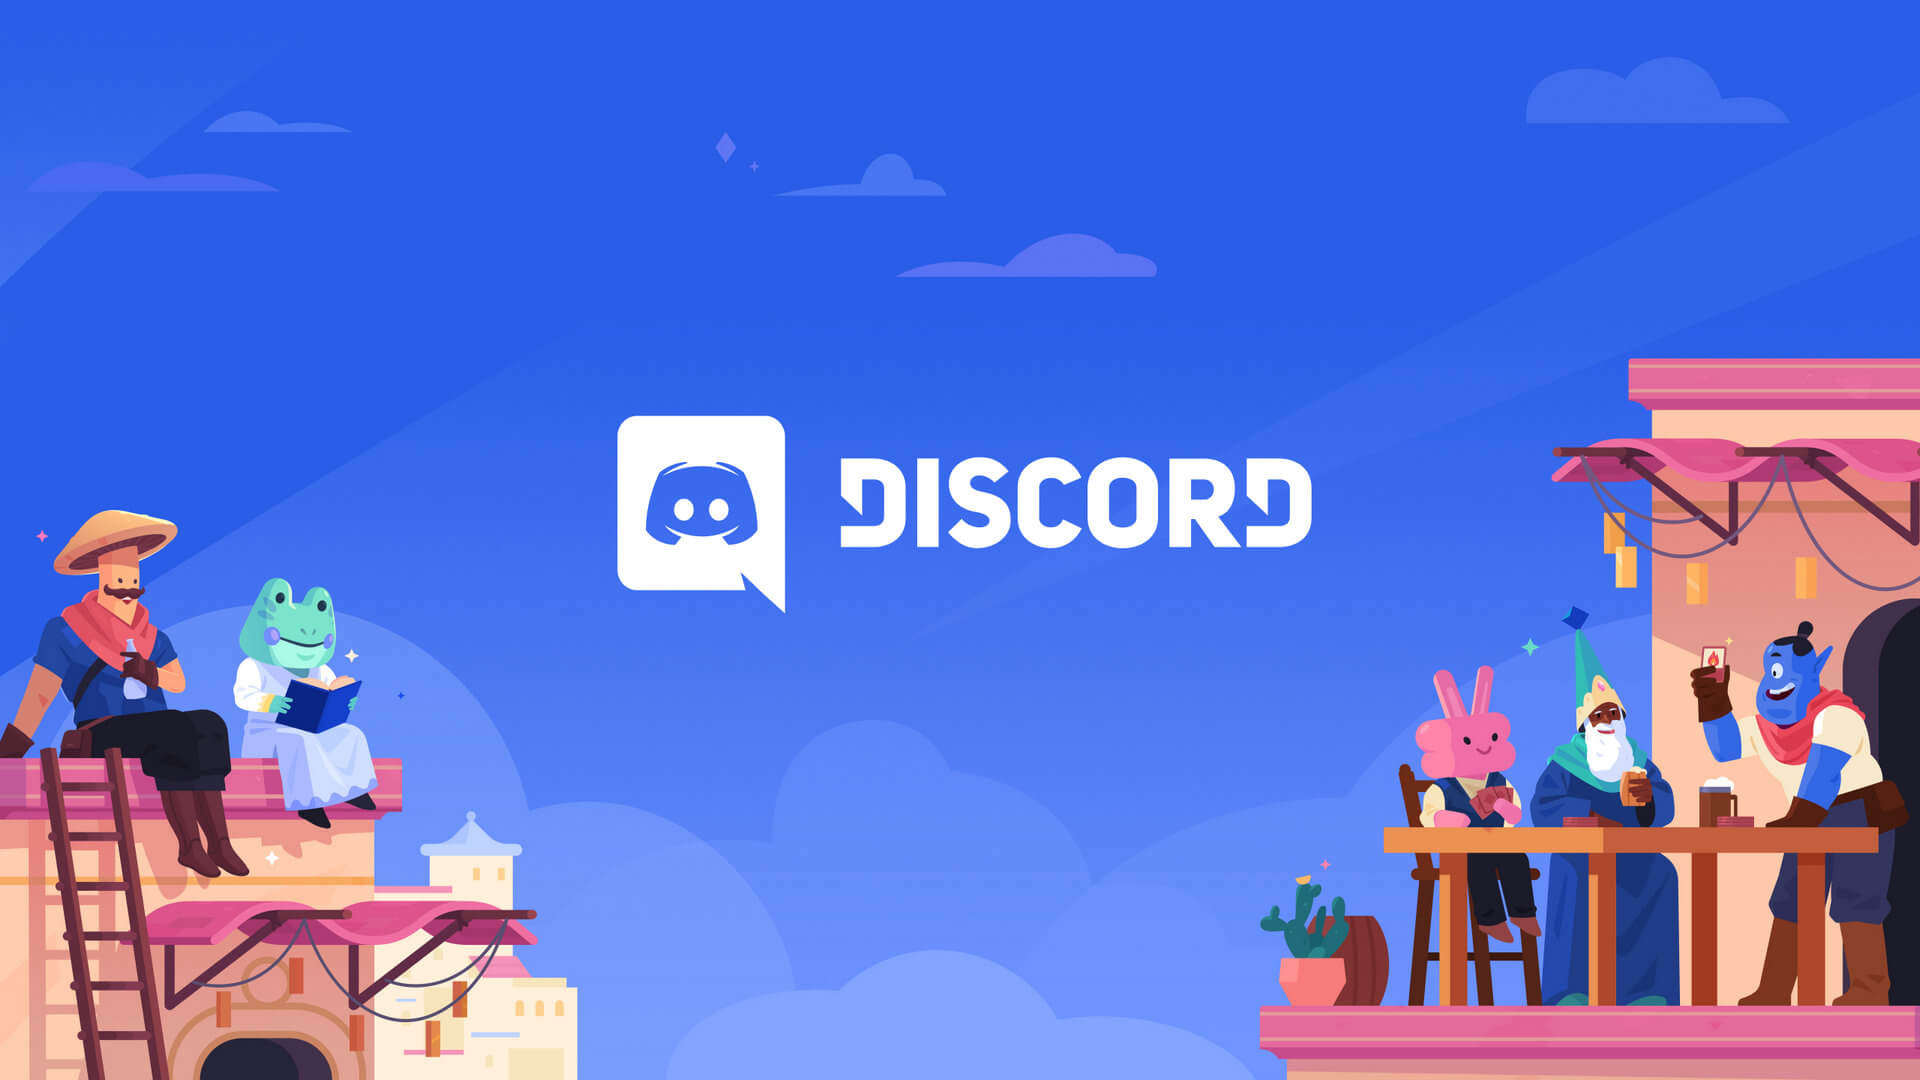 Discord Restored After Widespread Outage